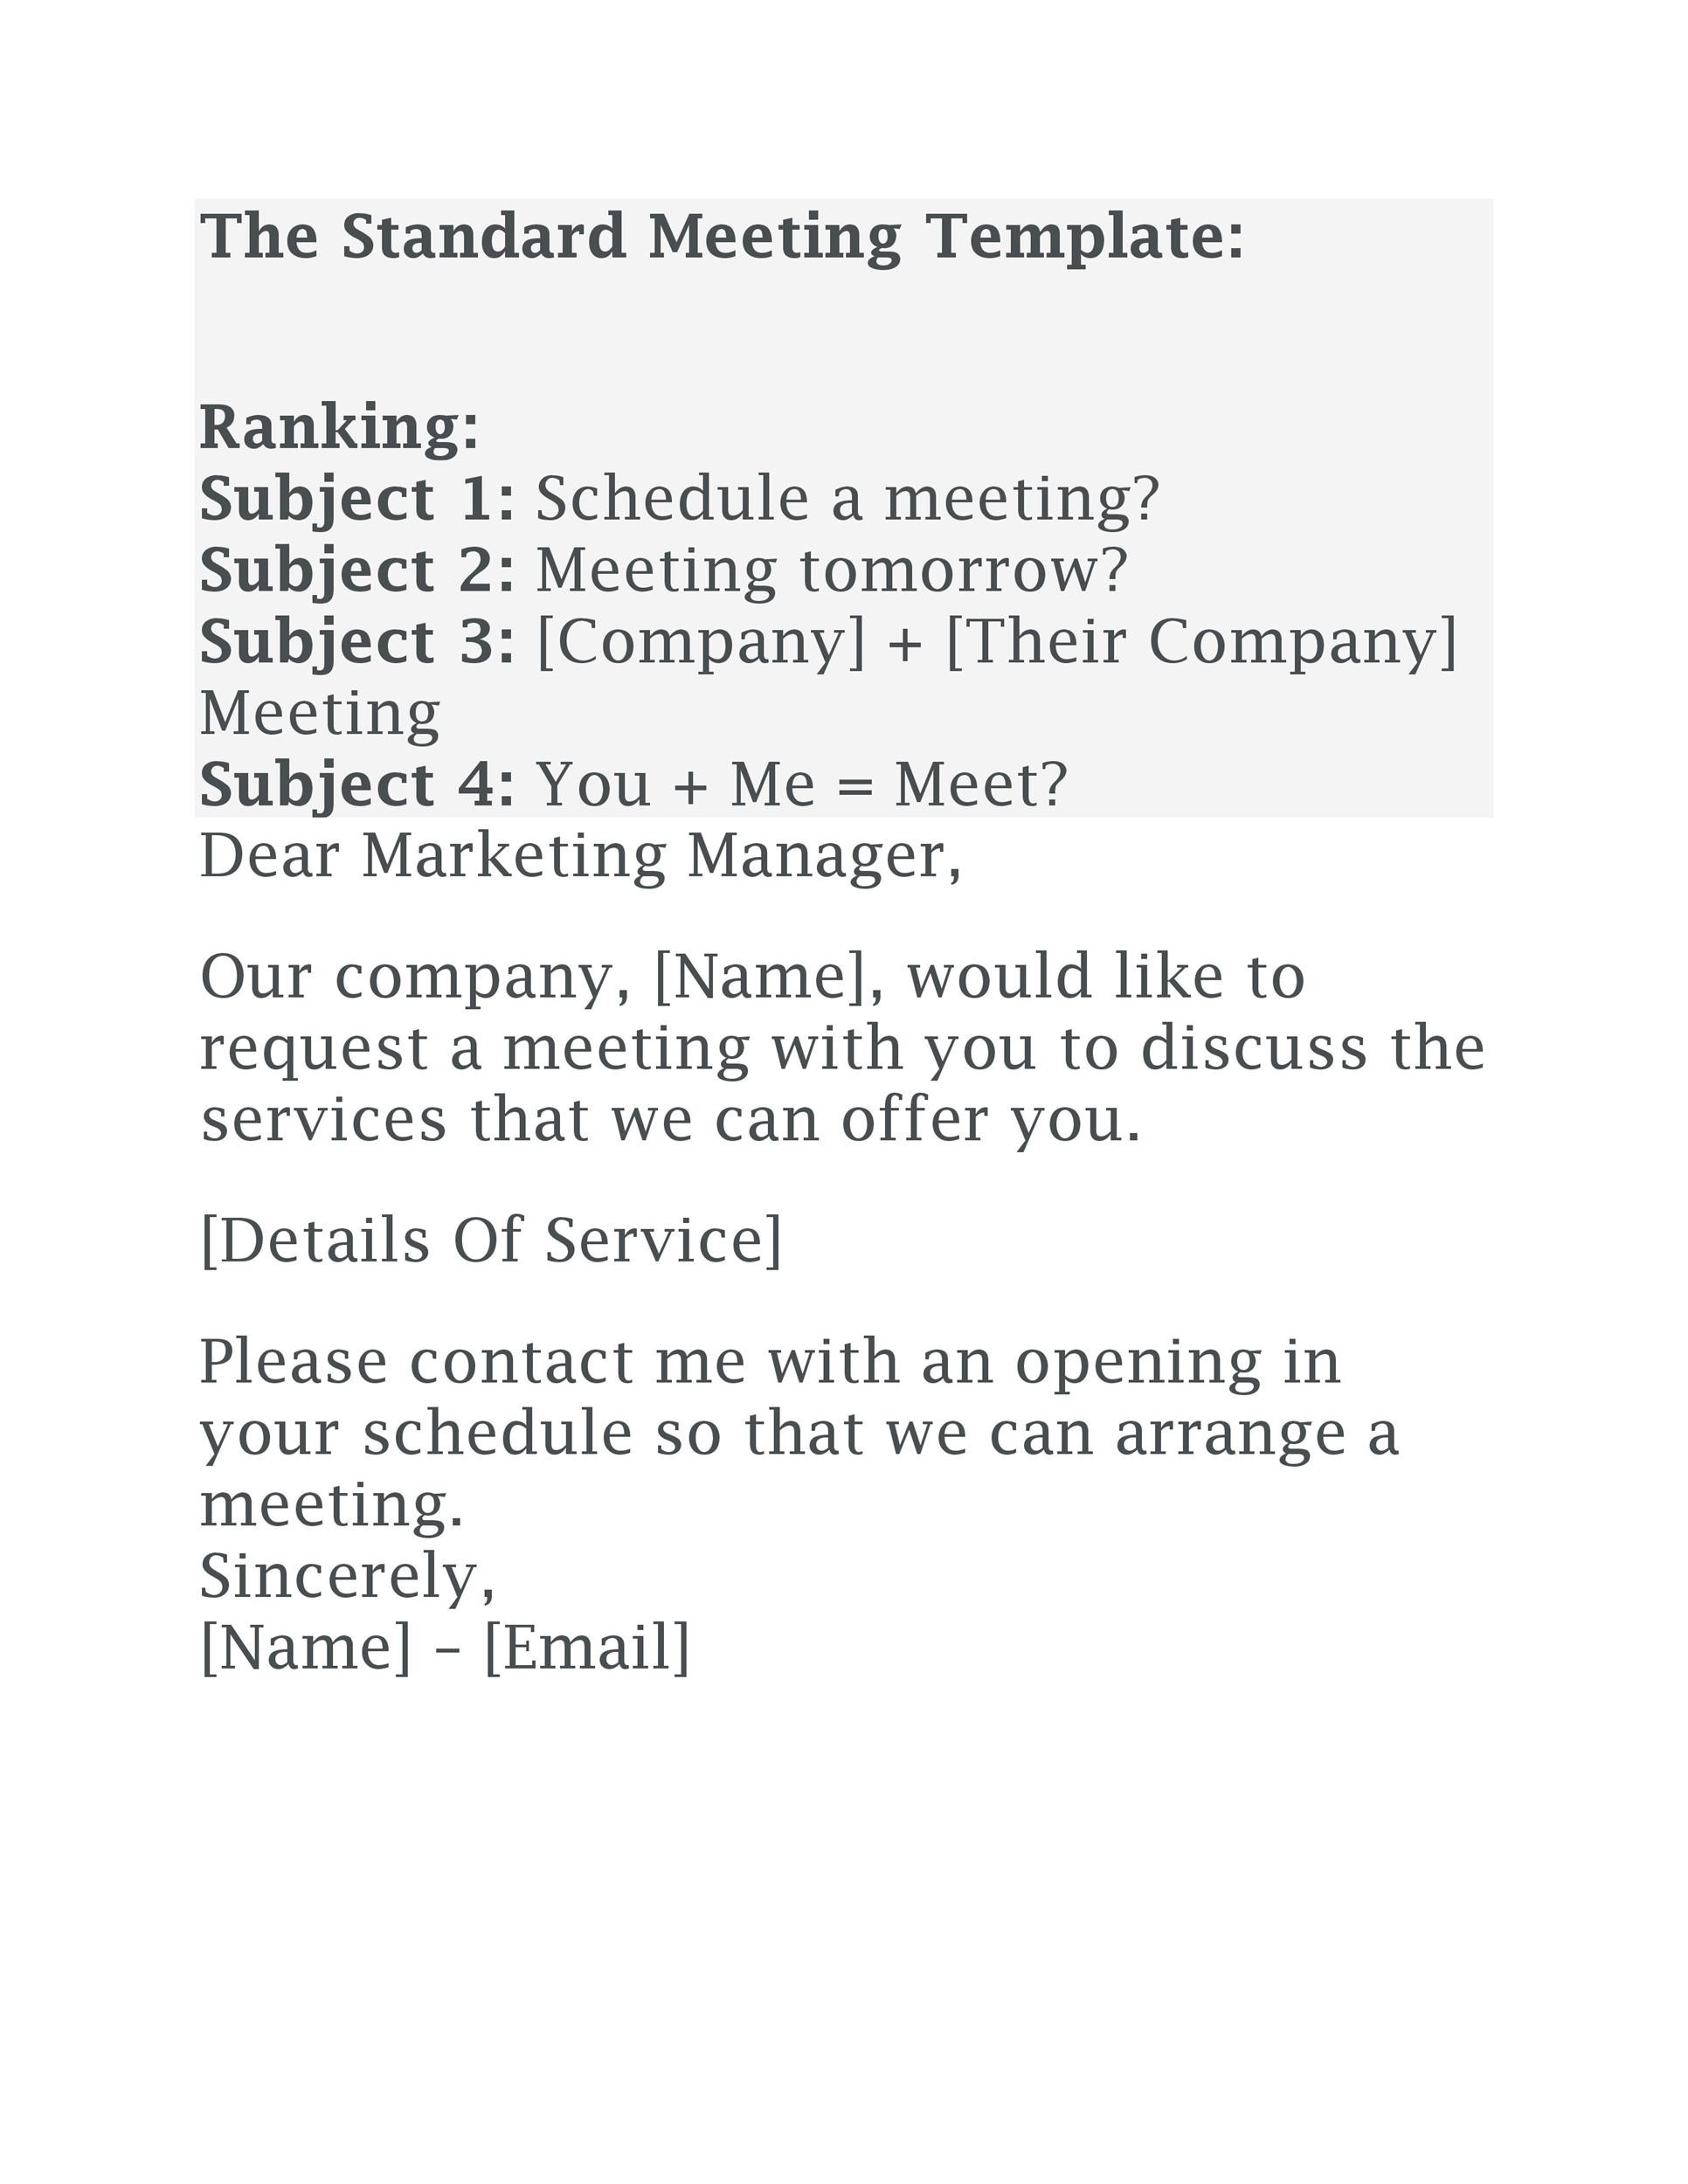 Free meeting request email 33